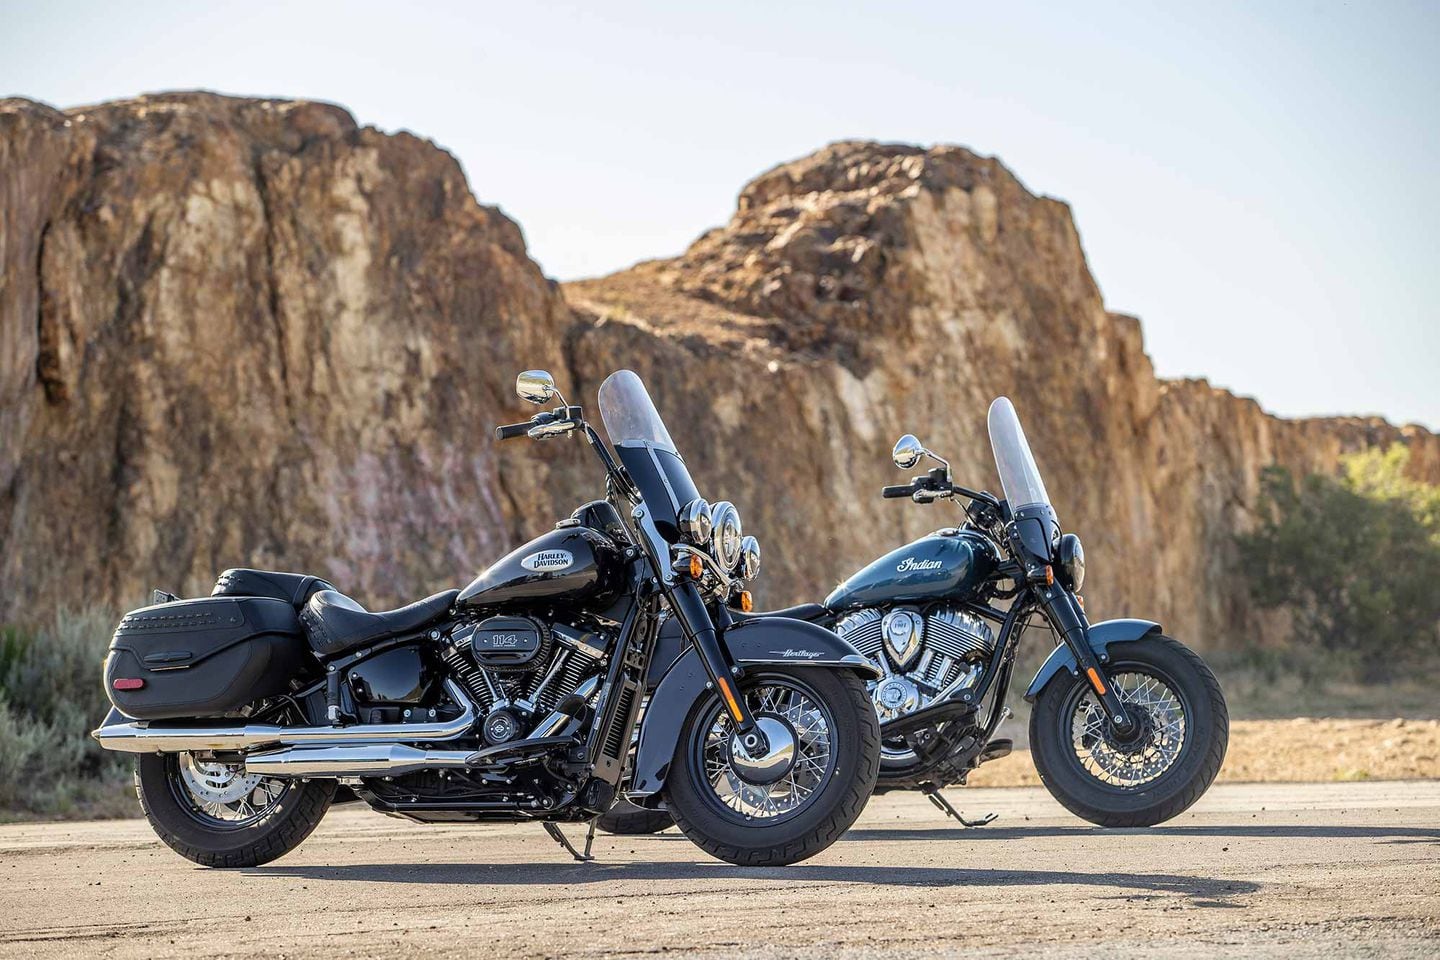 2021 Harley Davidson Heritage Classic 114 Vs 2022 Indian Super Chief Limited Cycle World